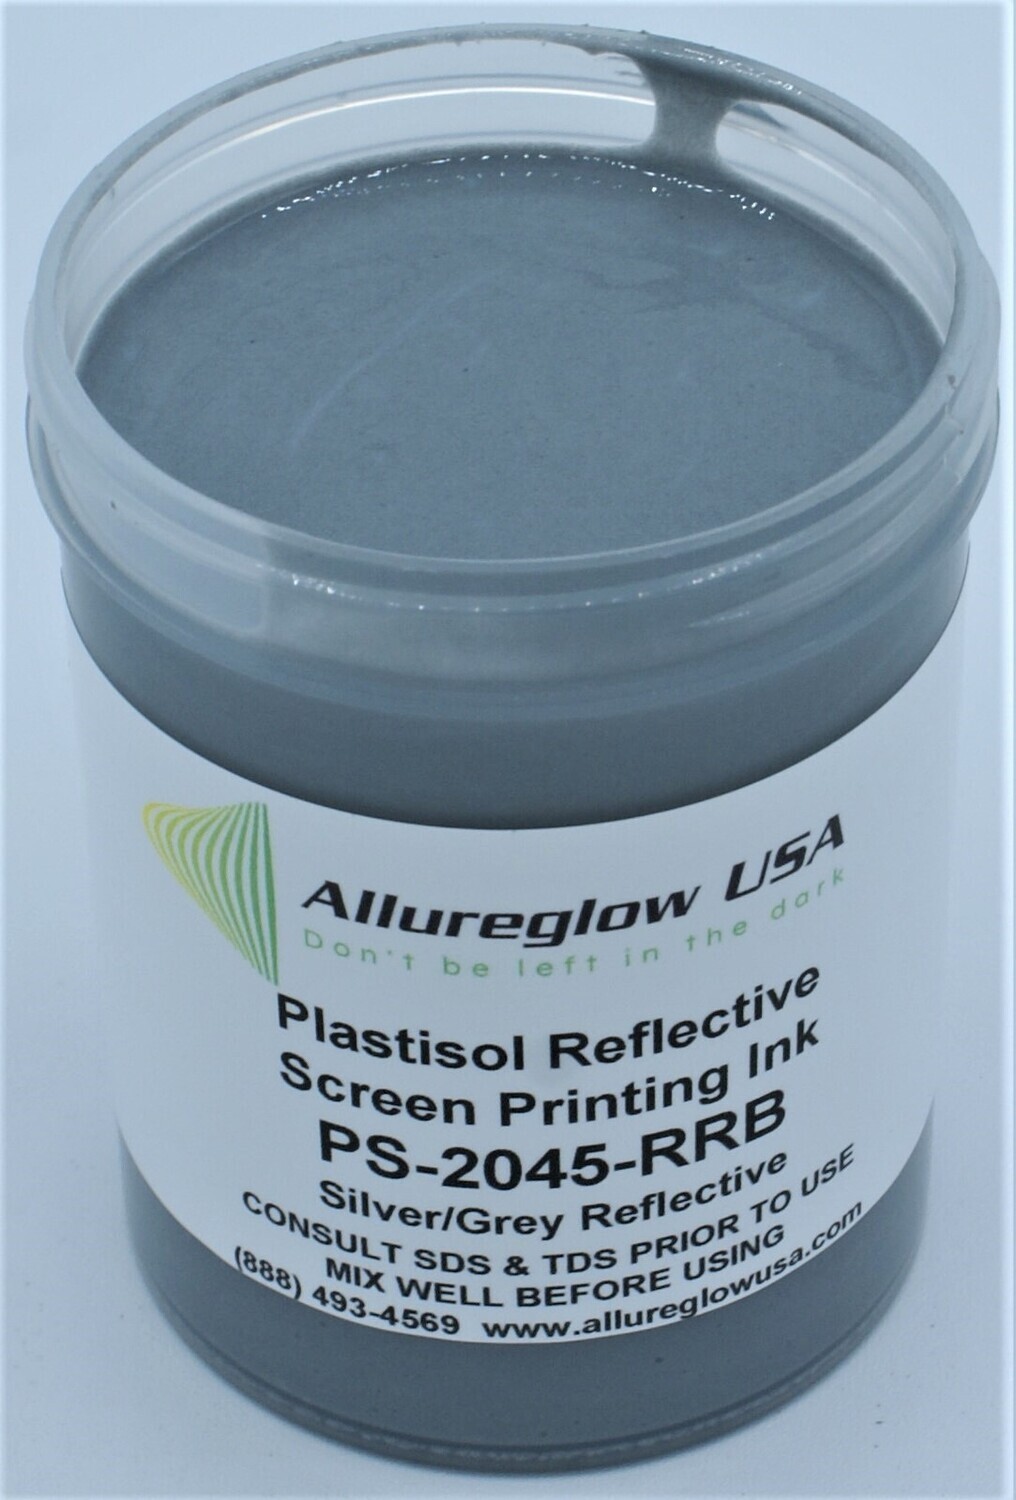 PS-2045-RRB-FV  PLASTISOL SILVER/GRAY REFLECTIVE SCREEN PRINTING INK 5 GALLON